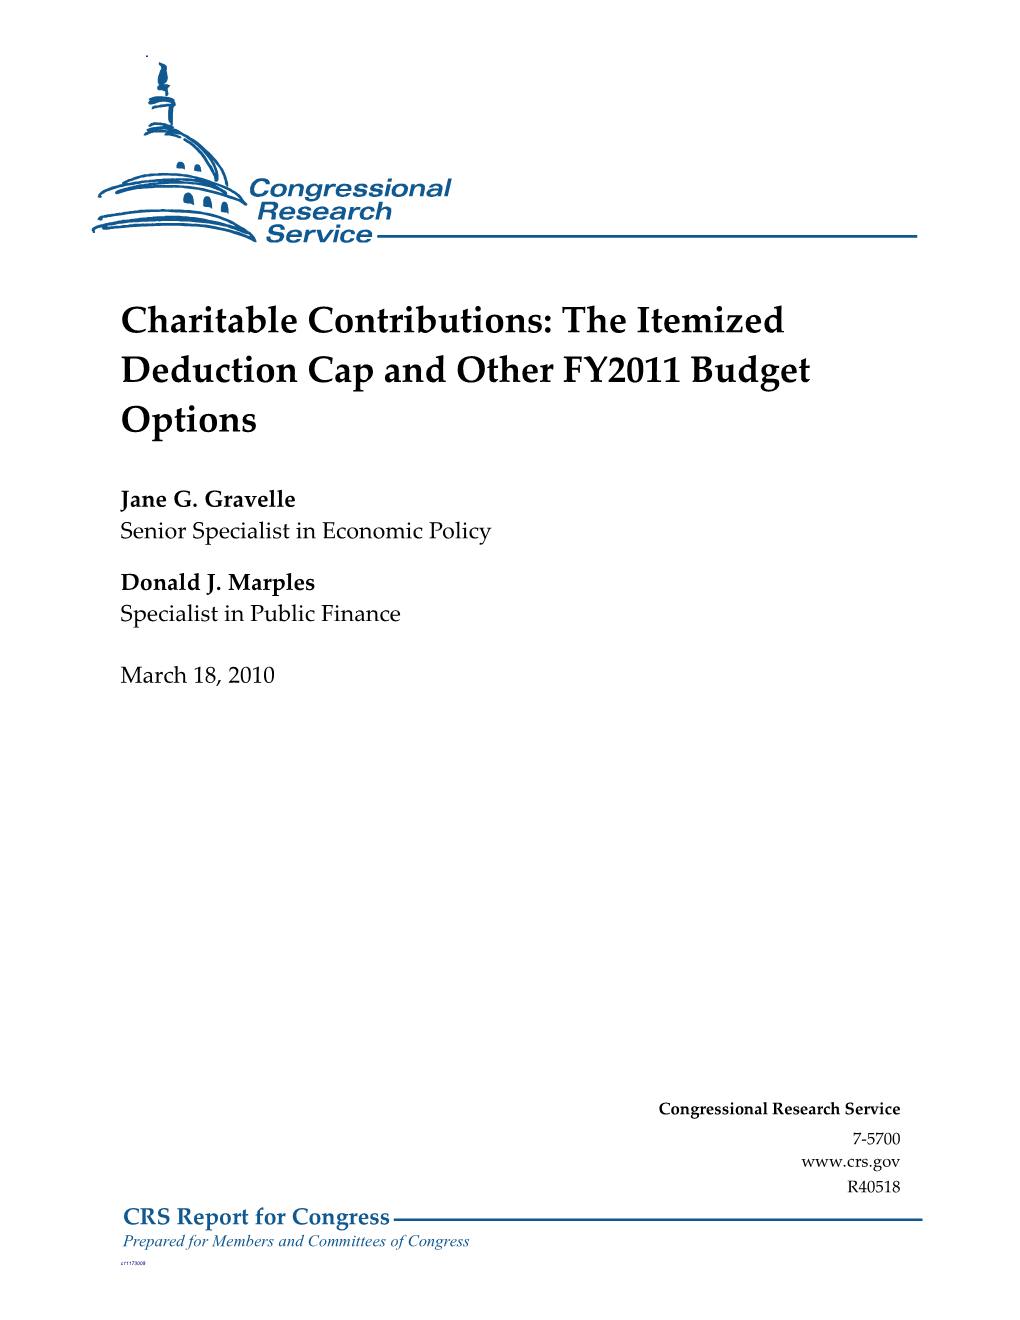 Charitable Contributions: the Itemized Deduction Cap and Other FY2011 Budget Options